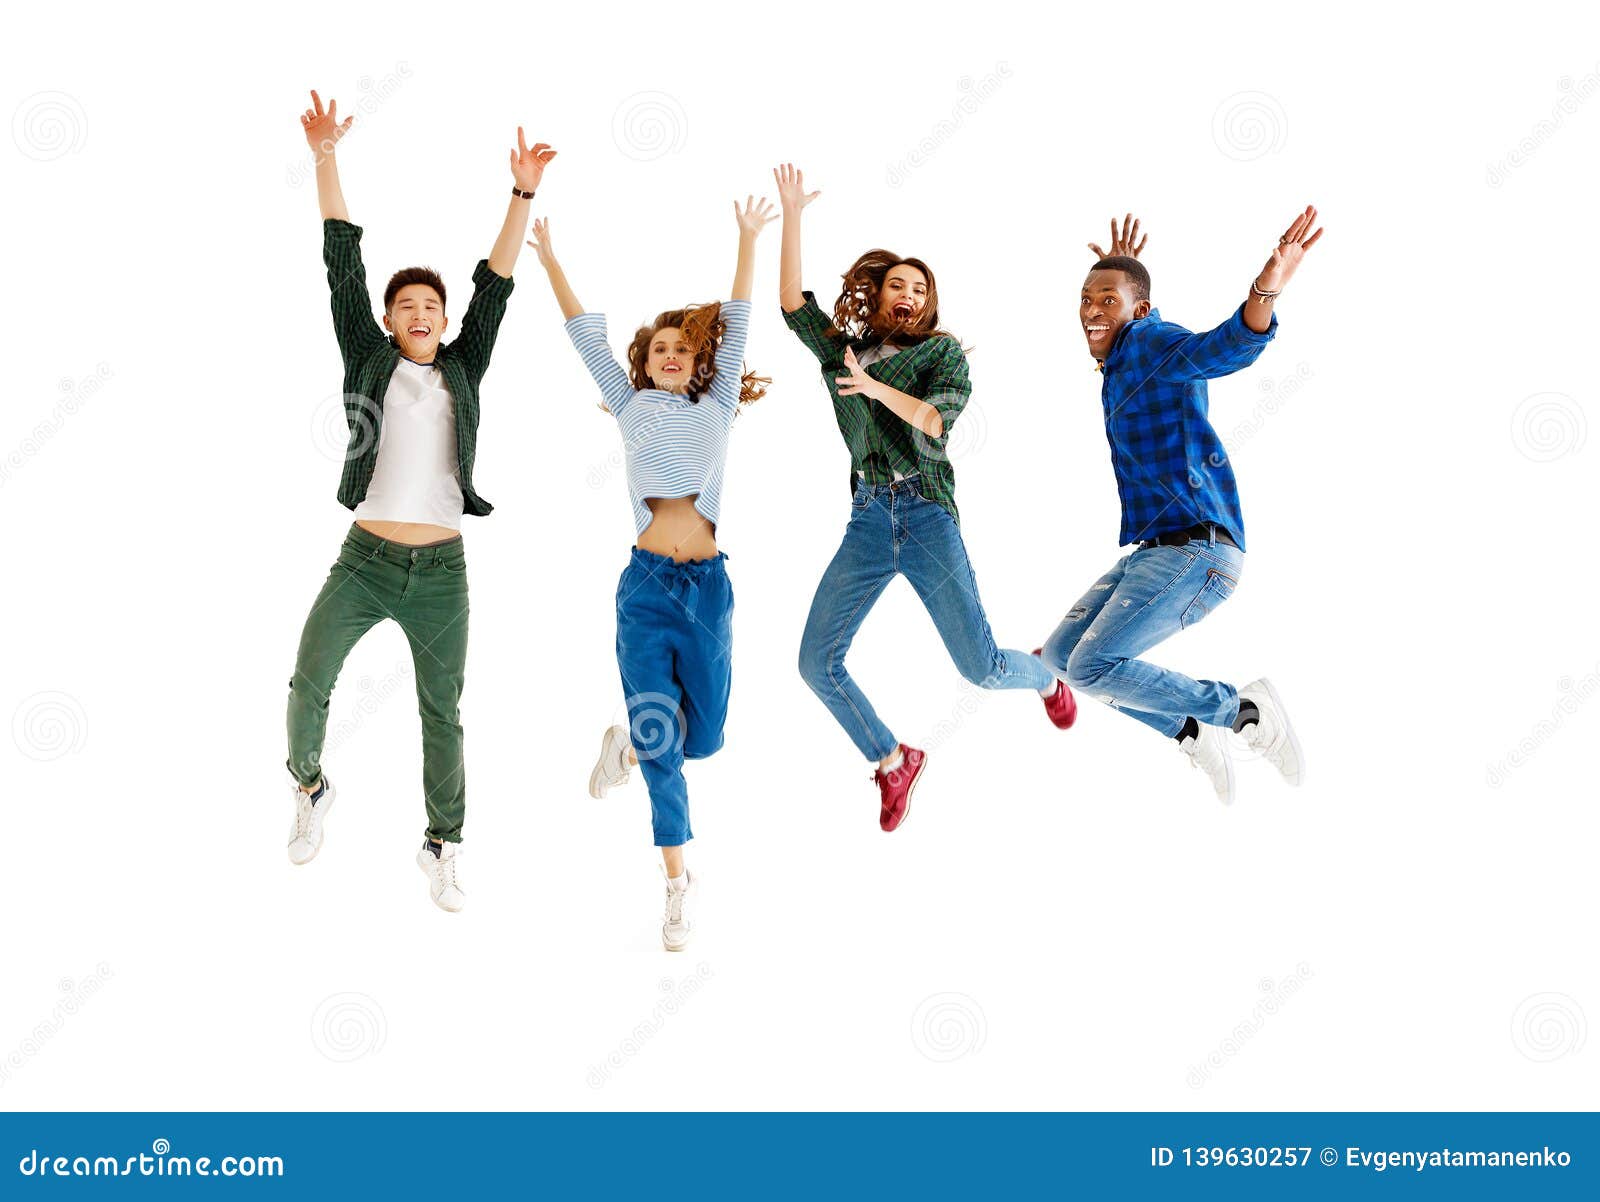 Group of Cheerful Young People Men and Women Isolated on White Background  Stock Image - Image of cheerful, adult: 139630257